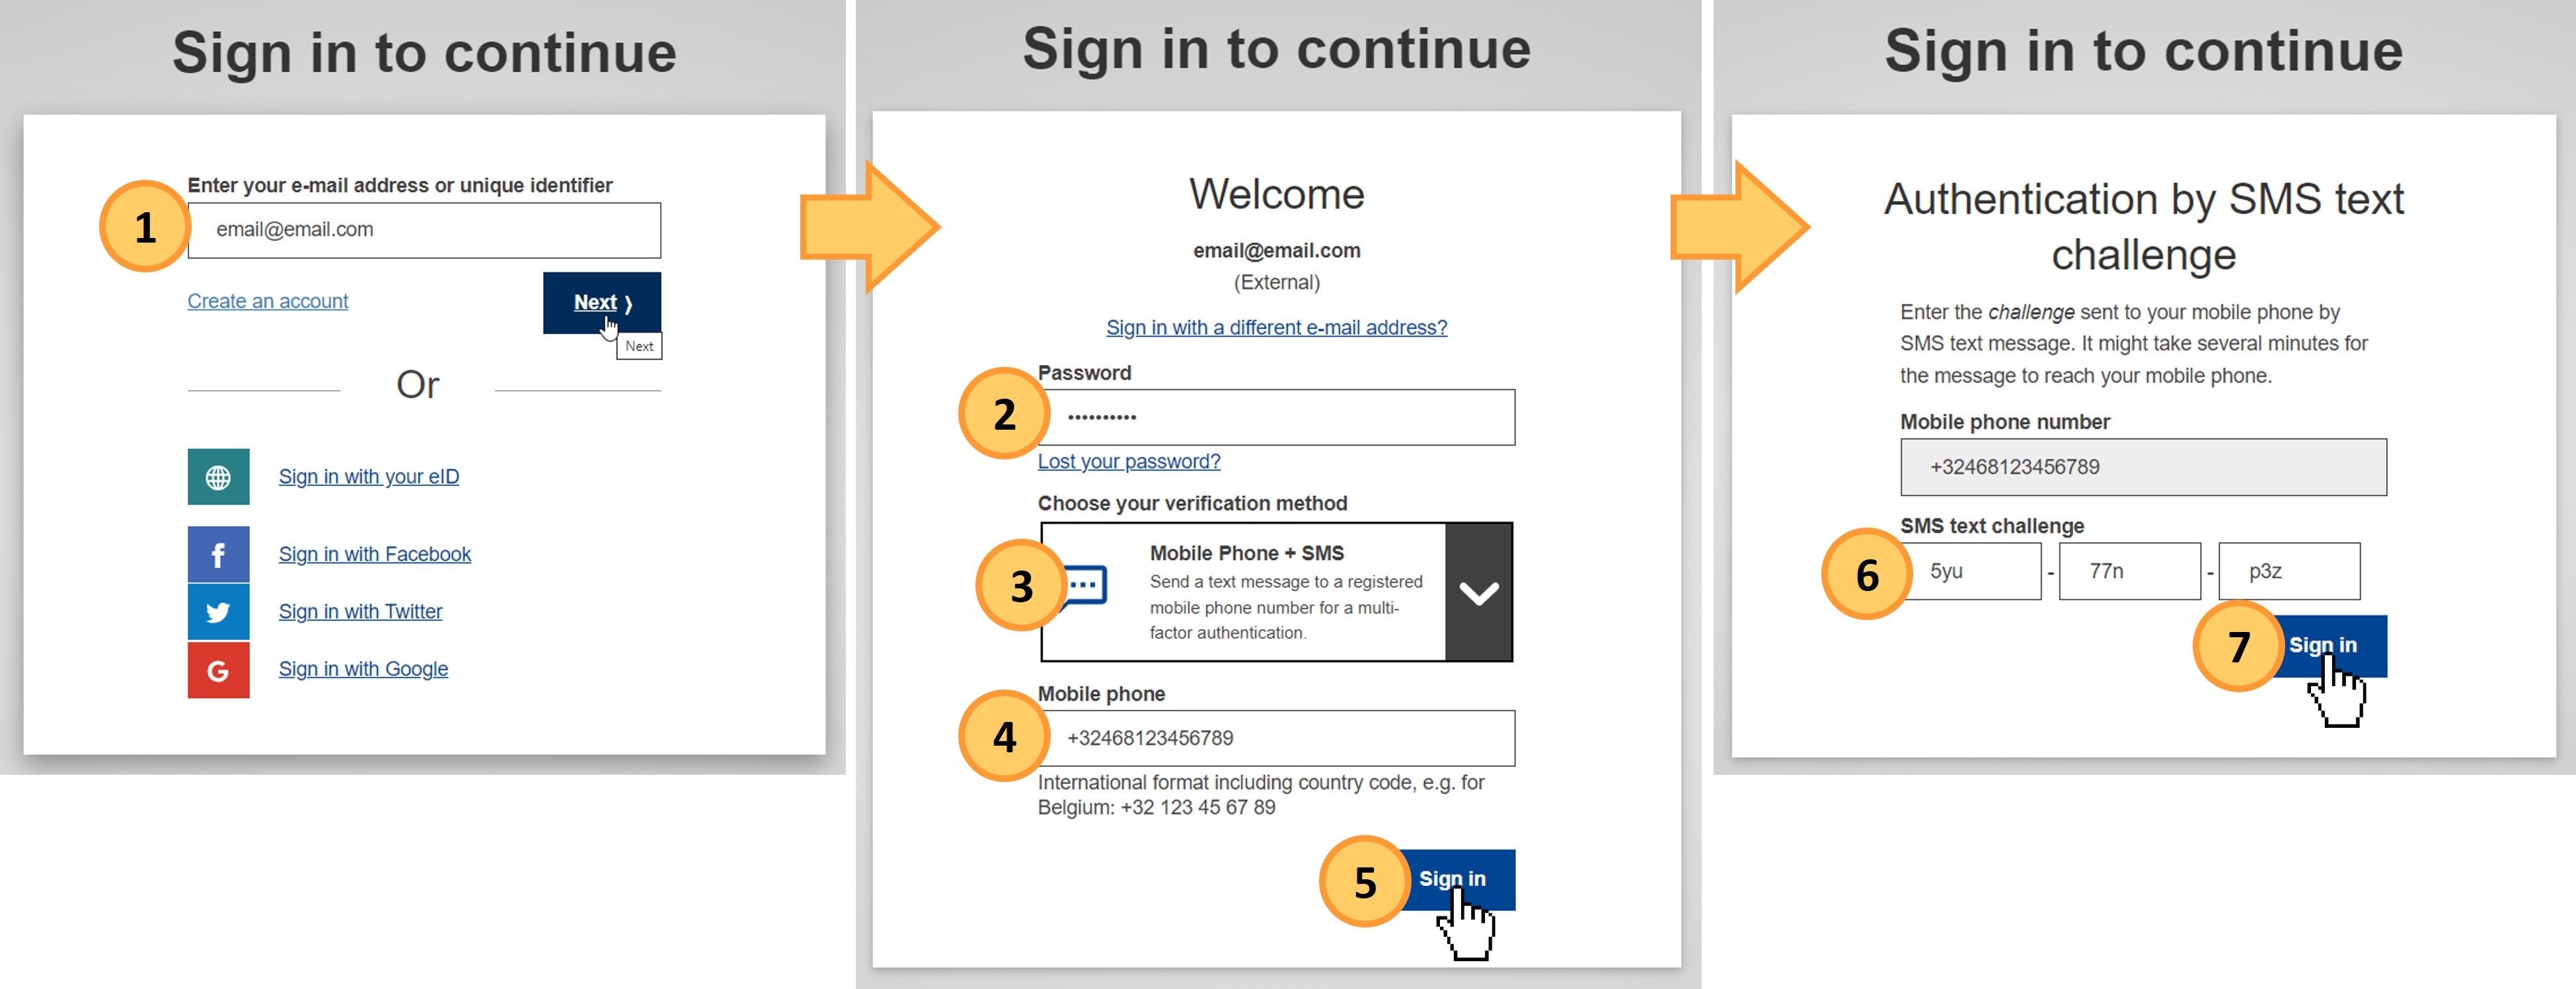 Sign in with an EU Login account using Mobile Phone and SMS